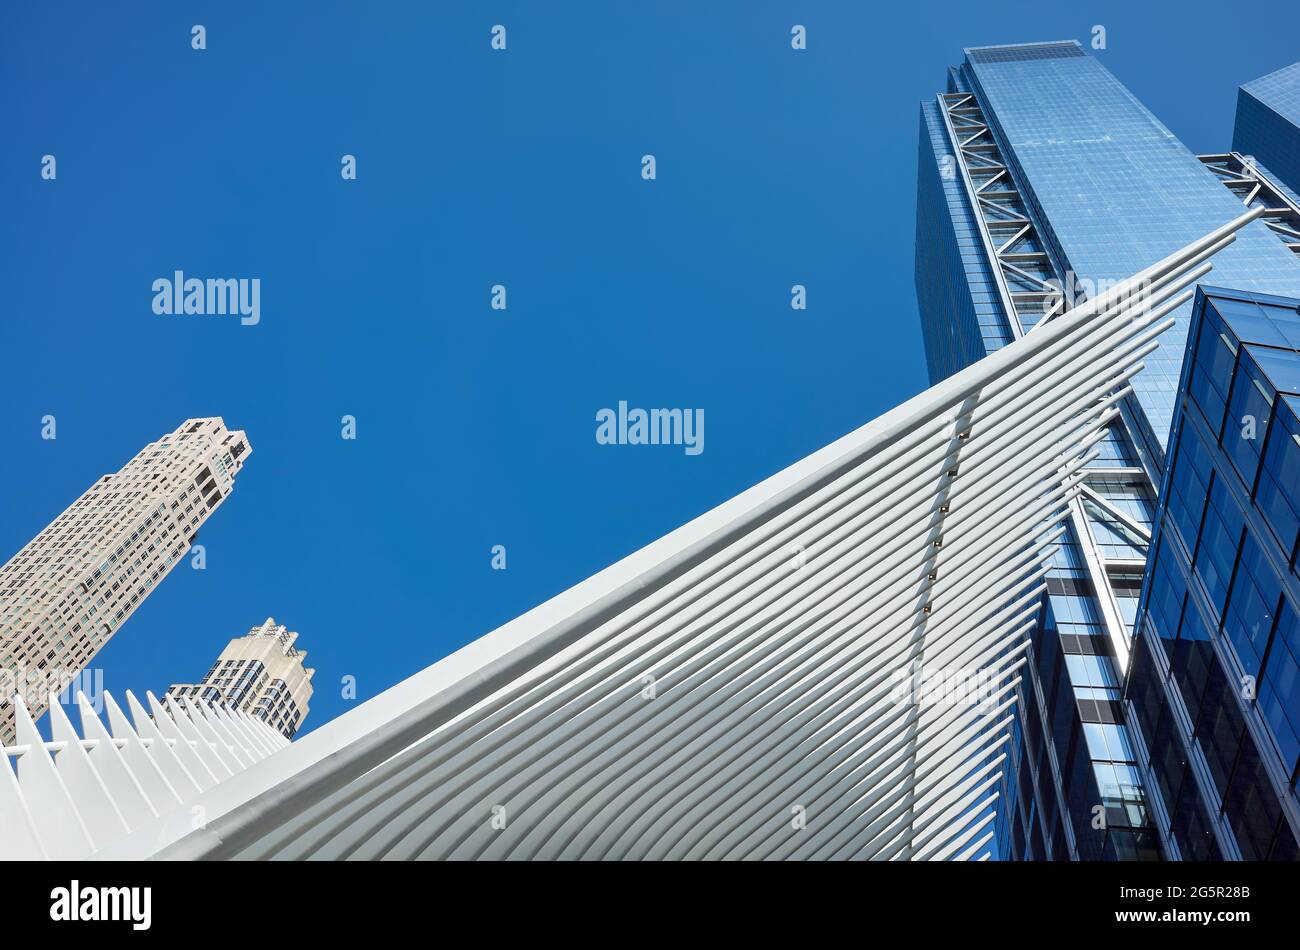 New York, USA - July 05, 2018: Looking up at World Trade Center complex with Oculus ribs (WTC Transportation Hub) against the blue sky. Stock Photo